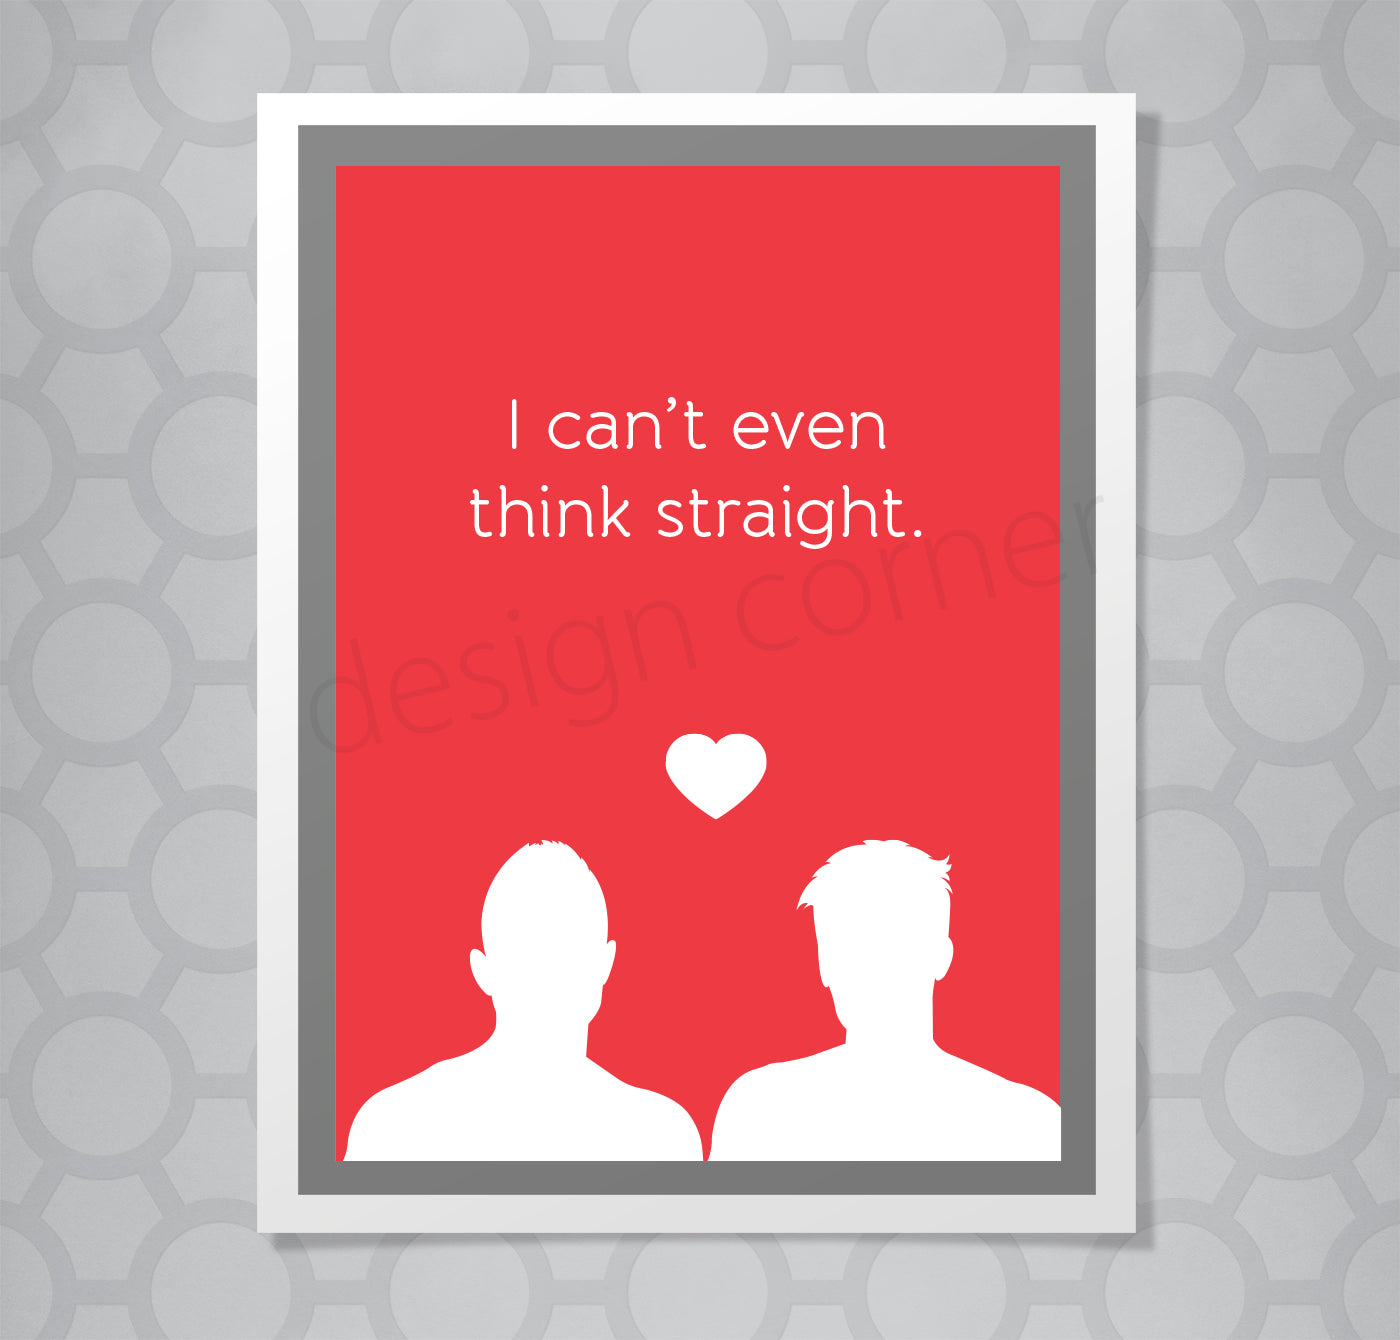 silhouettes of two men on front of greeting card with red background with heart between them. Caption says "I can't even think straight"